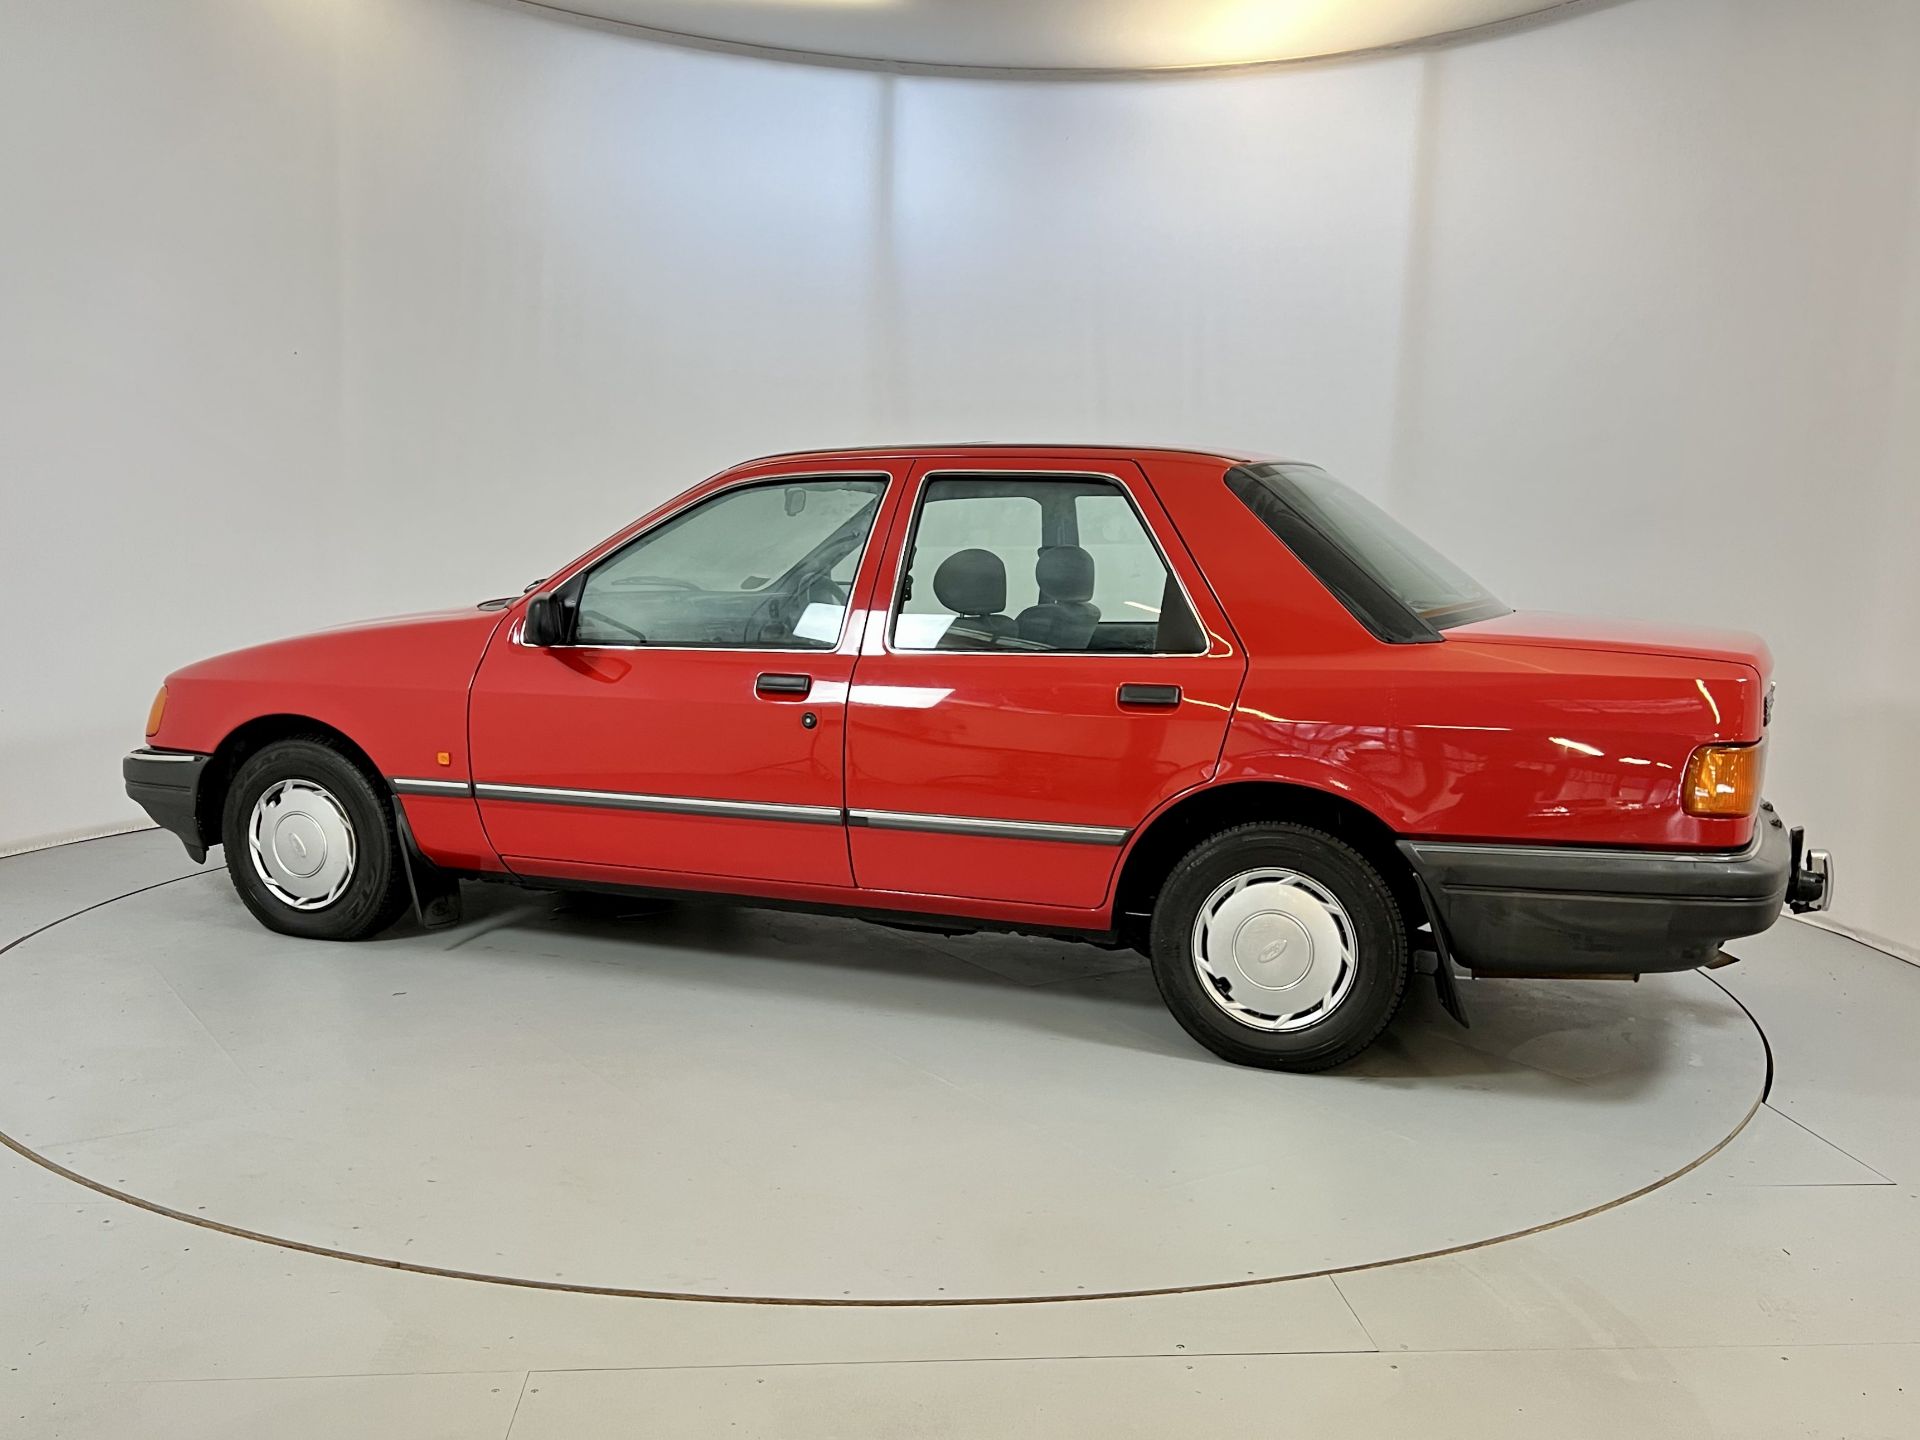 Ford Sierra Sapphire - Image 6 of 34